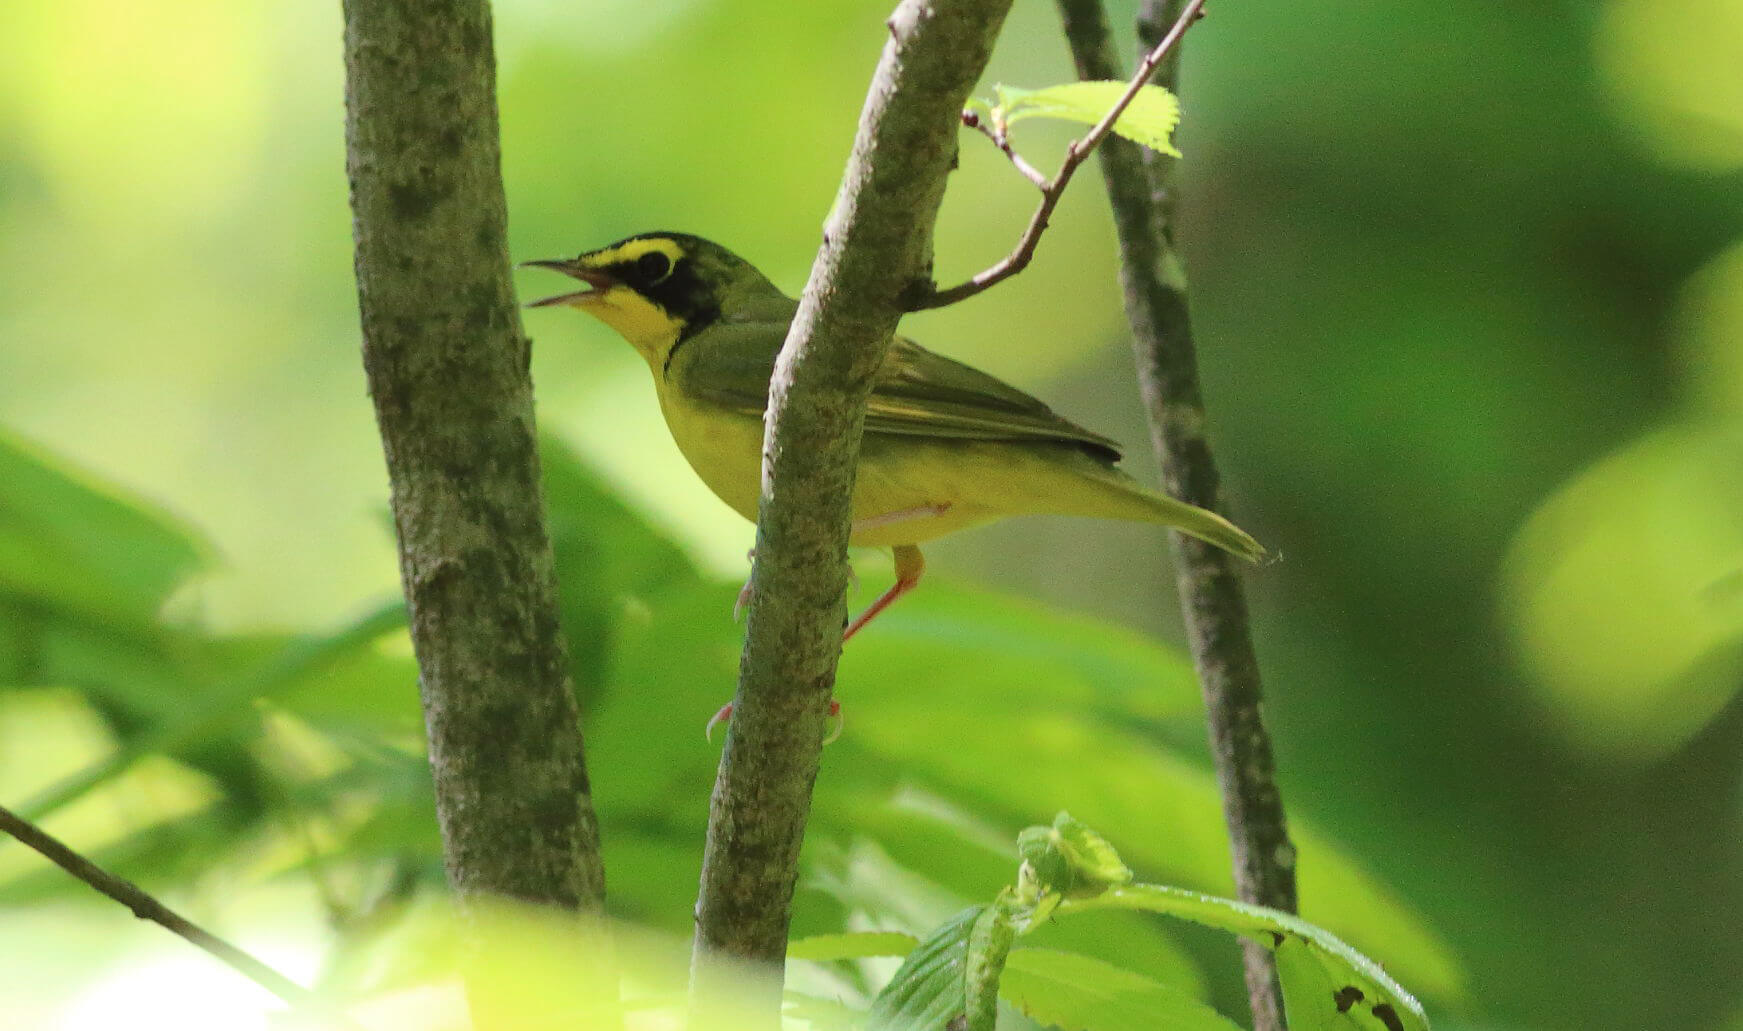 Kentucky Warblers called from towering 300-year-old trees in Arkansas's Delta National Forest. Photo by Bruce Beehler